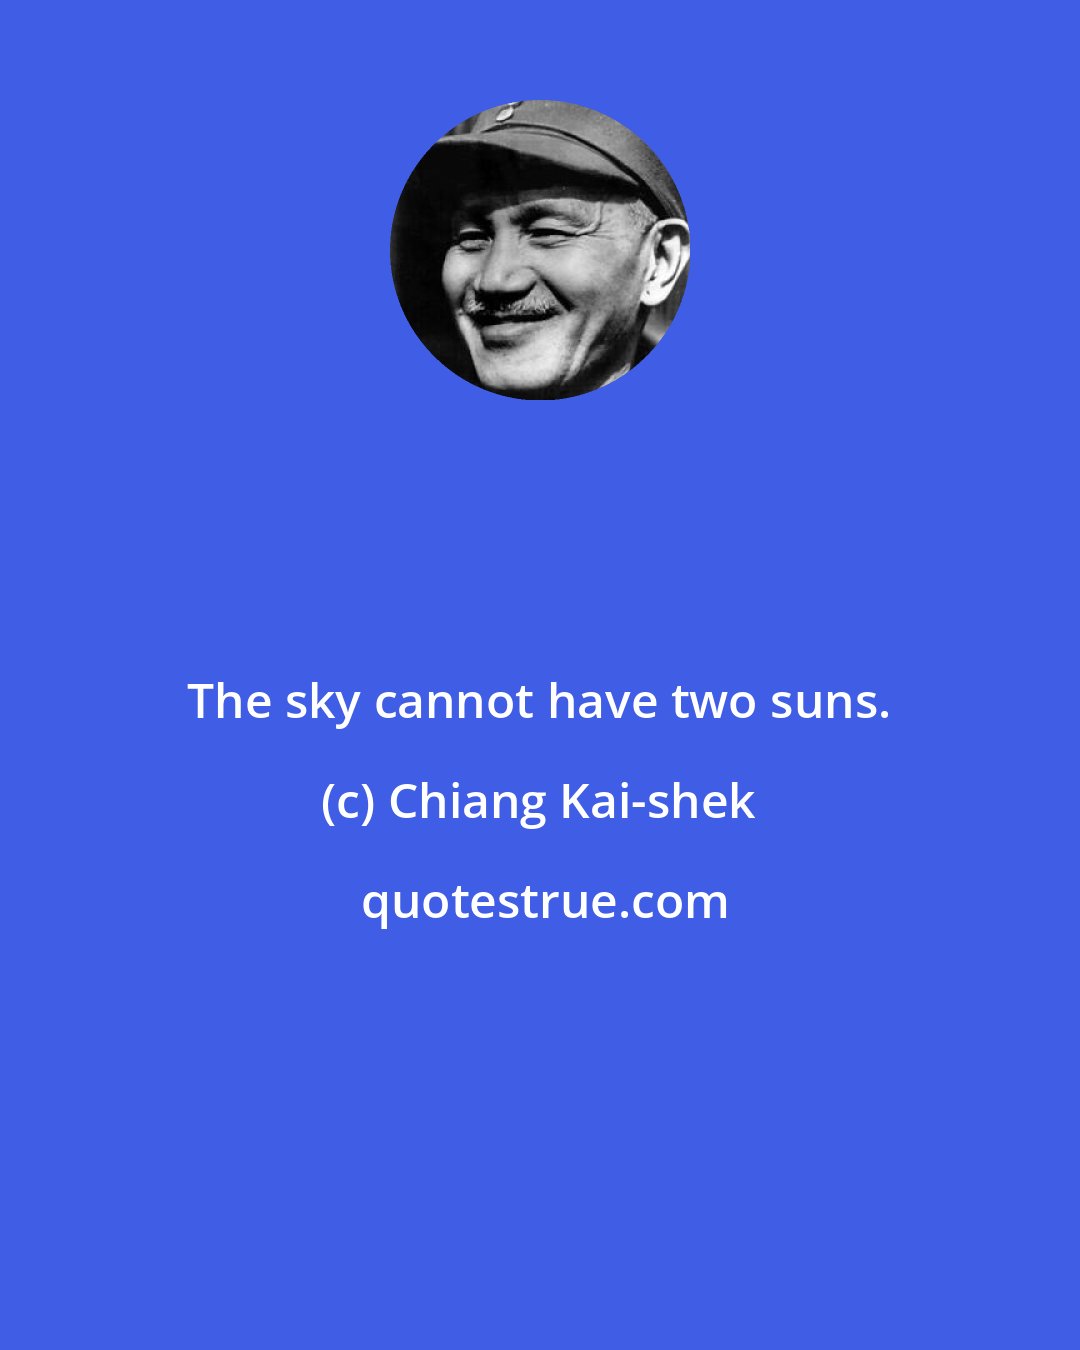 Chiang Kai-shek: The sky cannot have two suns.